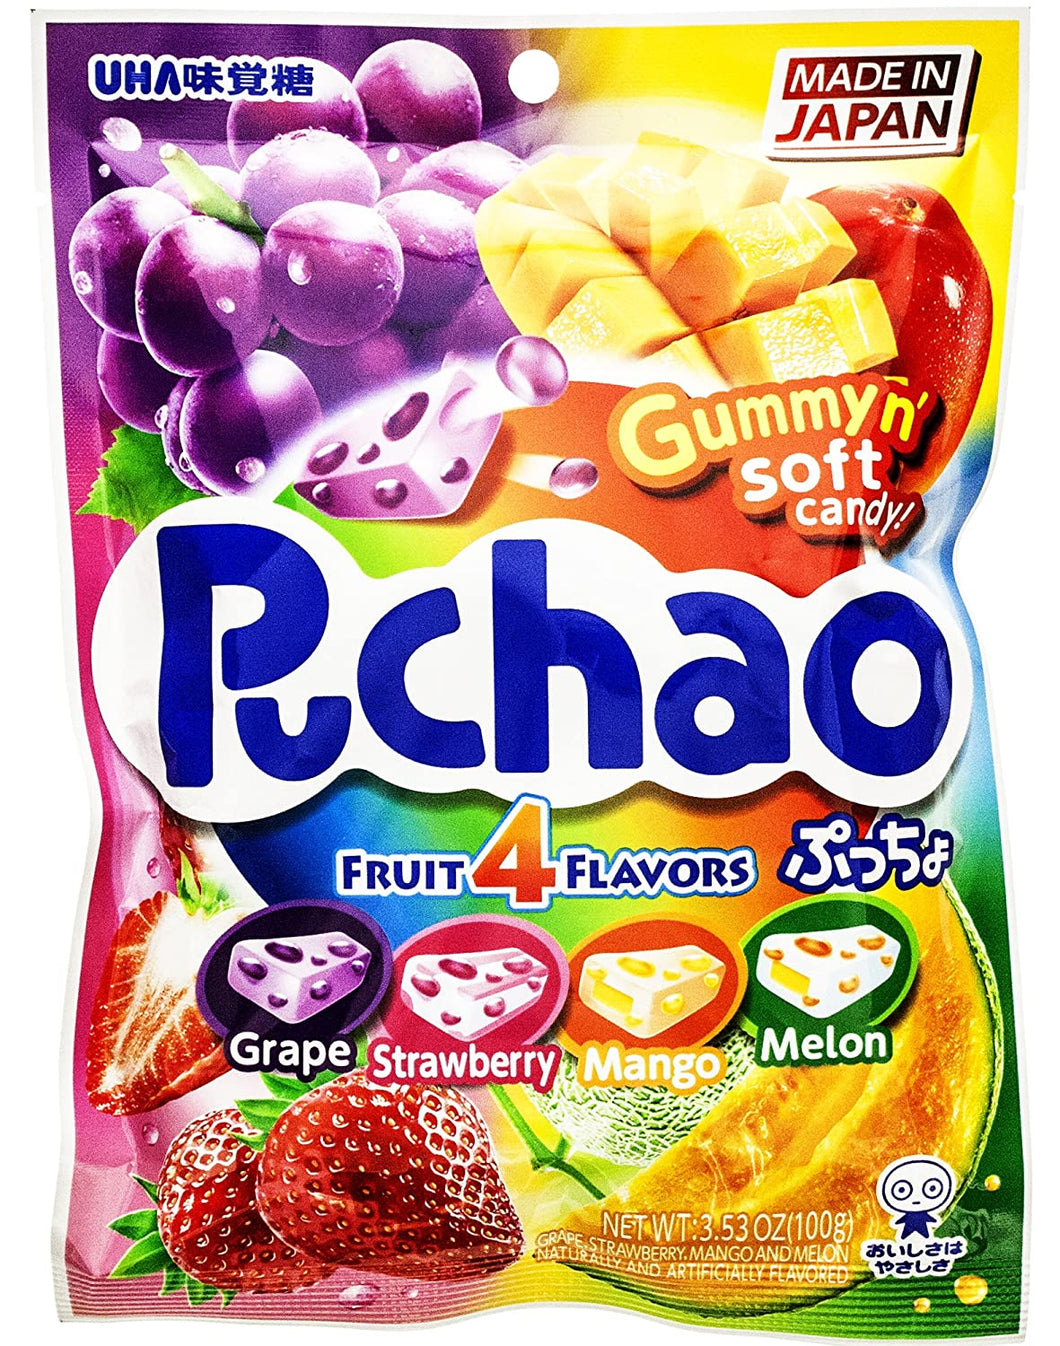 Puchao Chewy Candy Fruit 4 Flavor